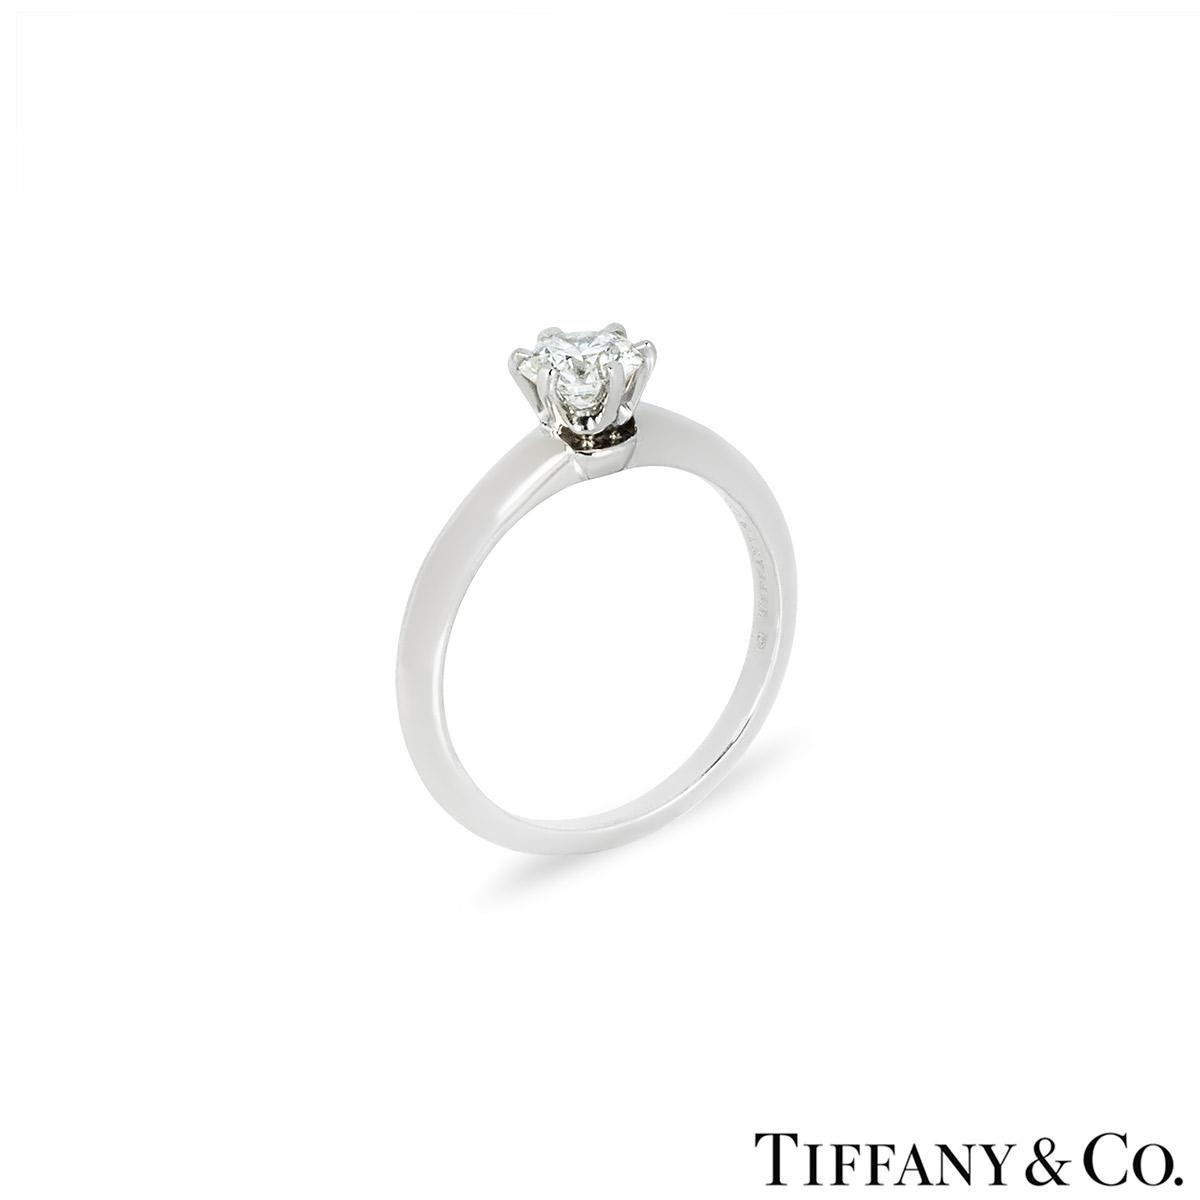 A beautiful platinum diamond solitaire by Tiffany & Co. from the Setting collection. The engagement ring is set to the centre with a round brilliant cut diamond in a classic 6 claw mount, weighing 0.56ct, H colour and VVS1 clarity. The knife edge